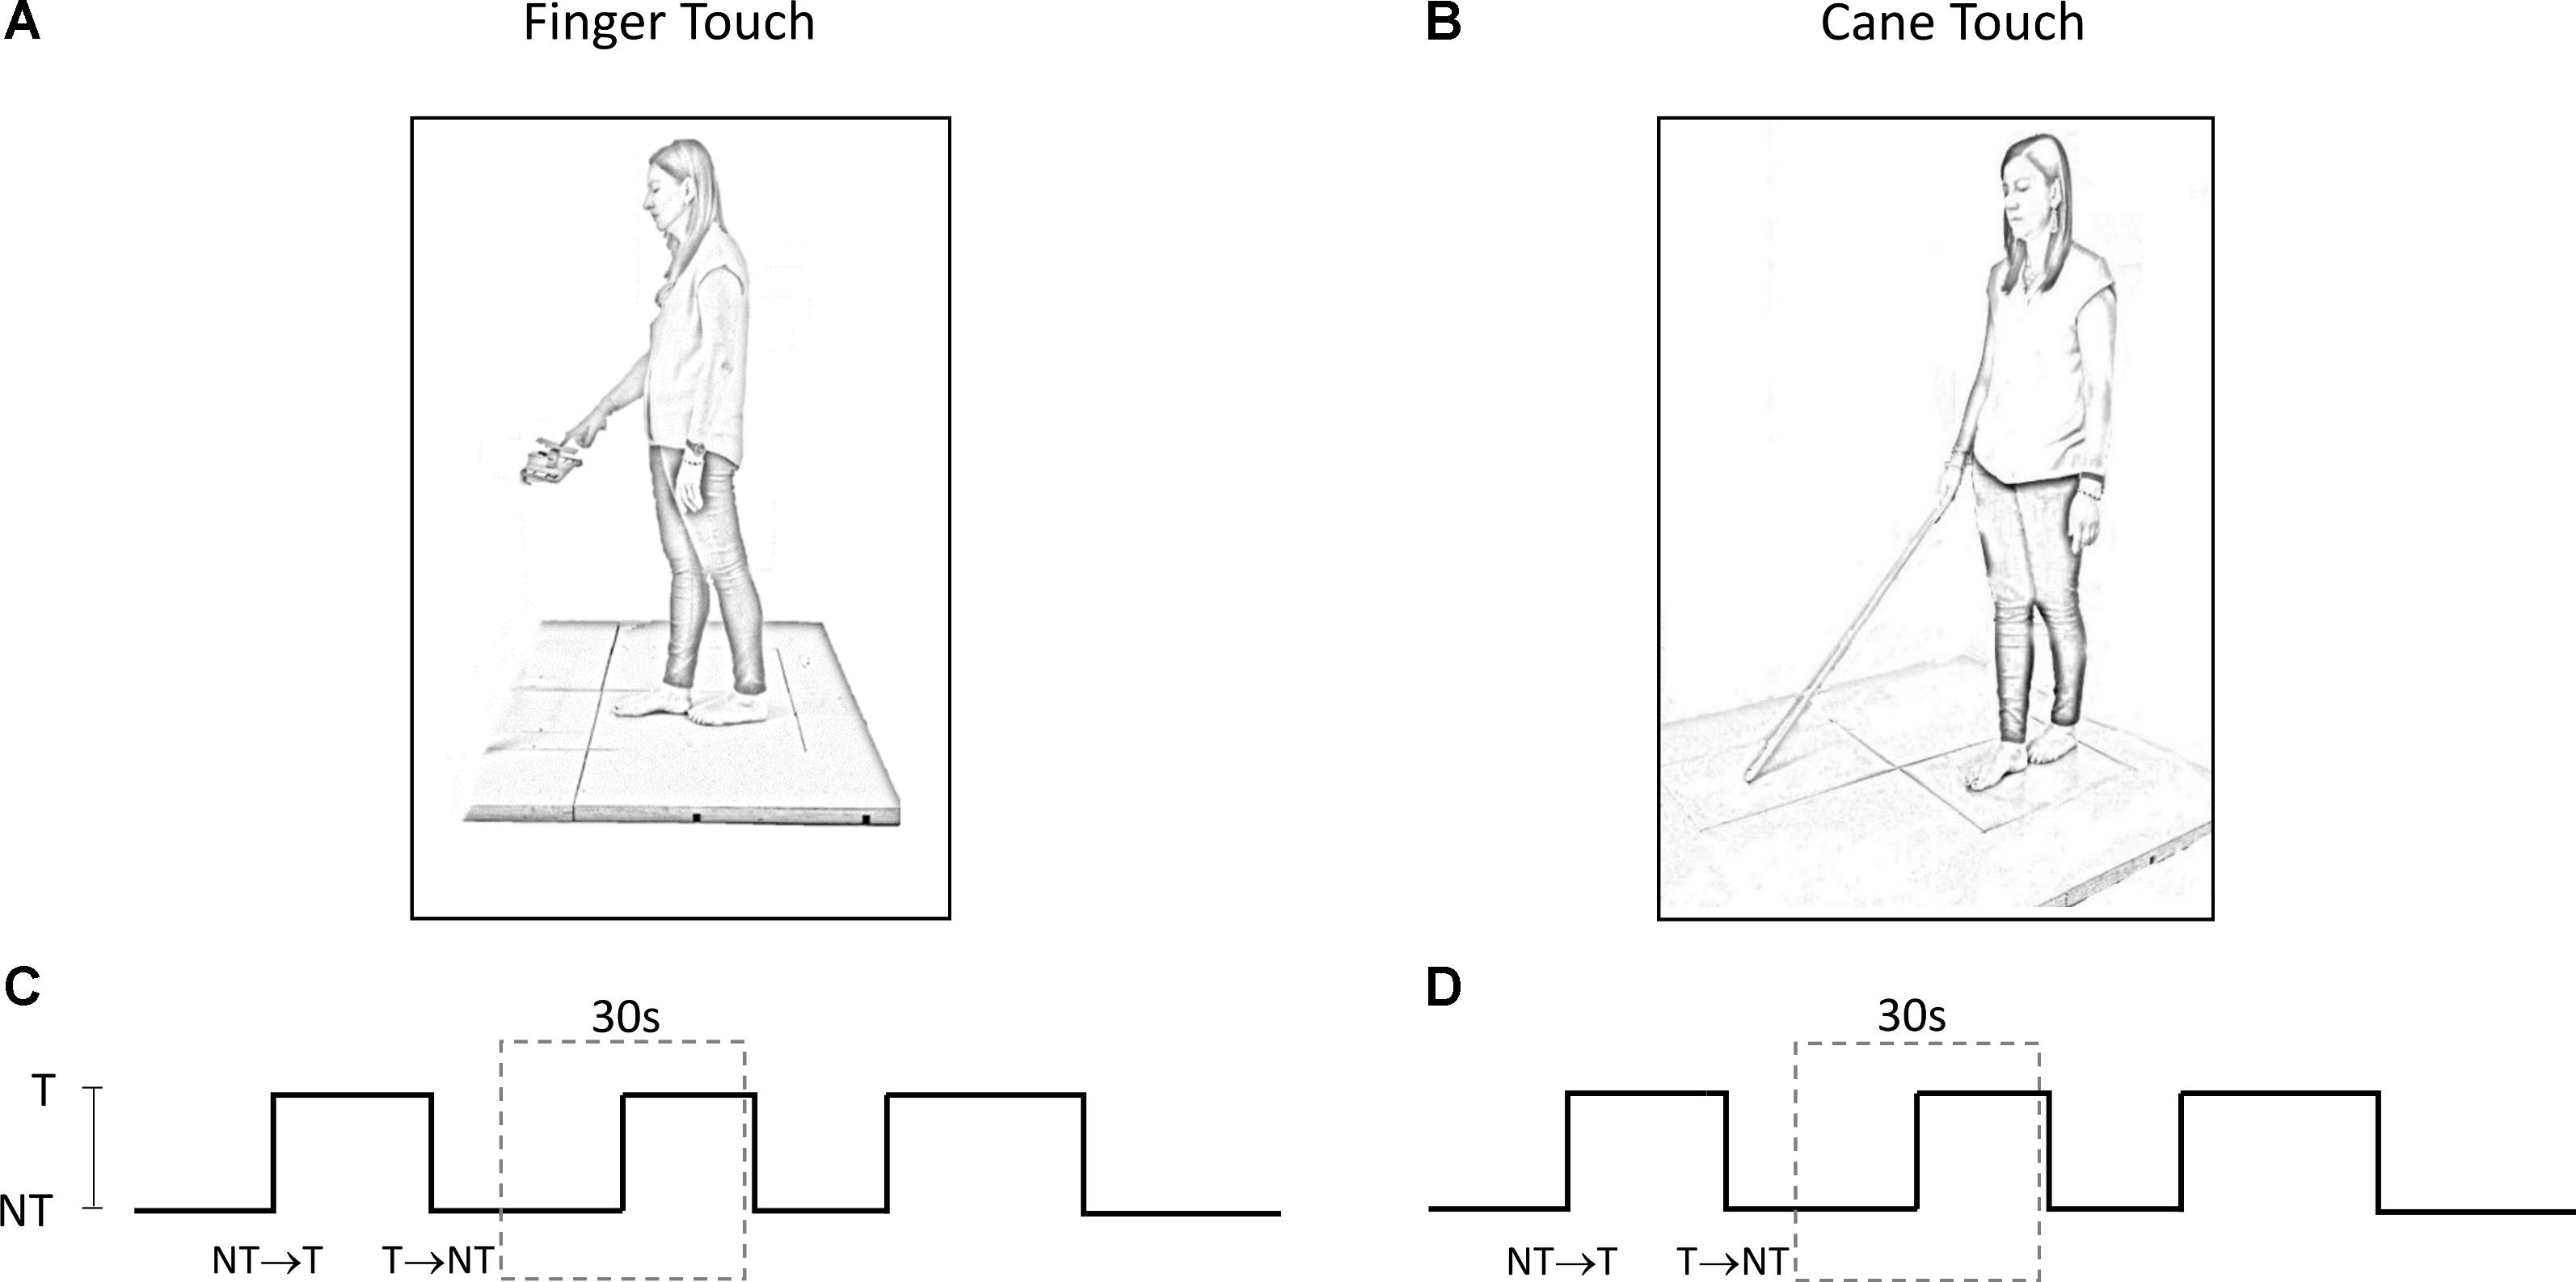 Frontiers Balance In Blind Subjects Cane And Fingertip Touch